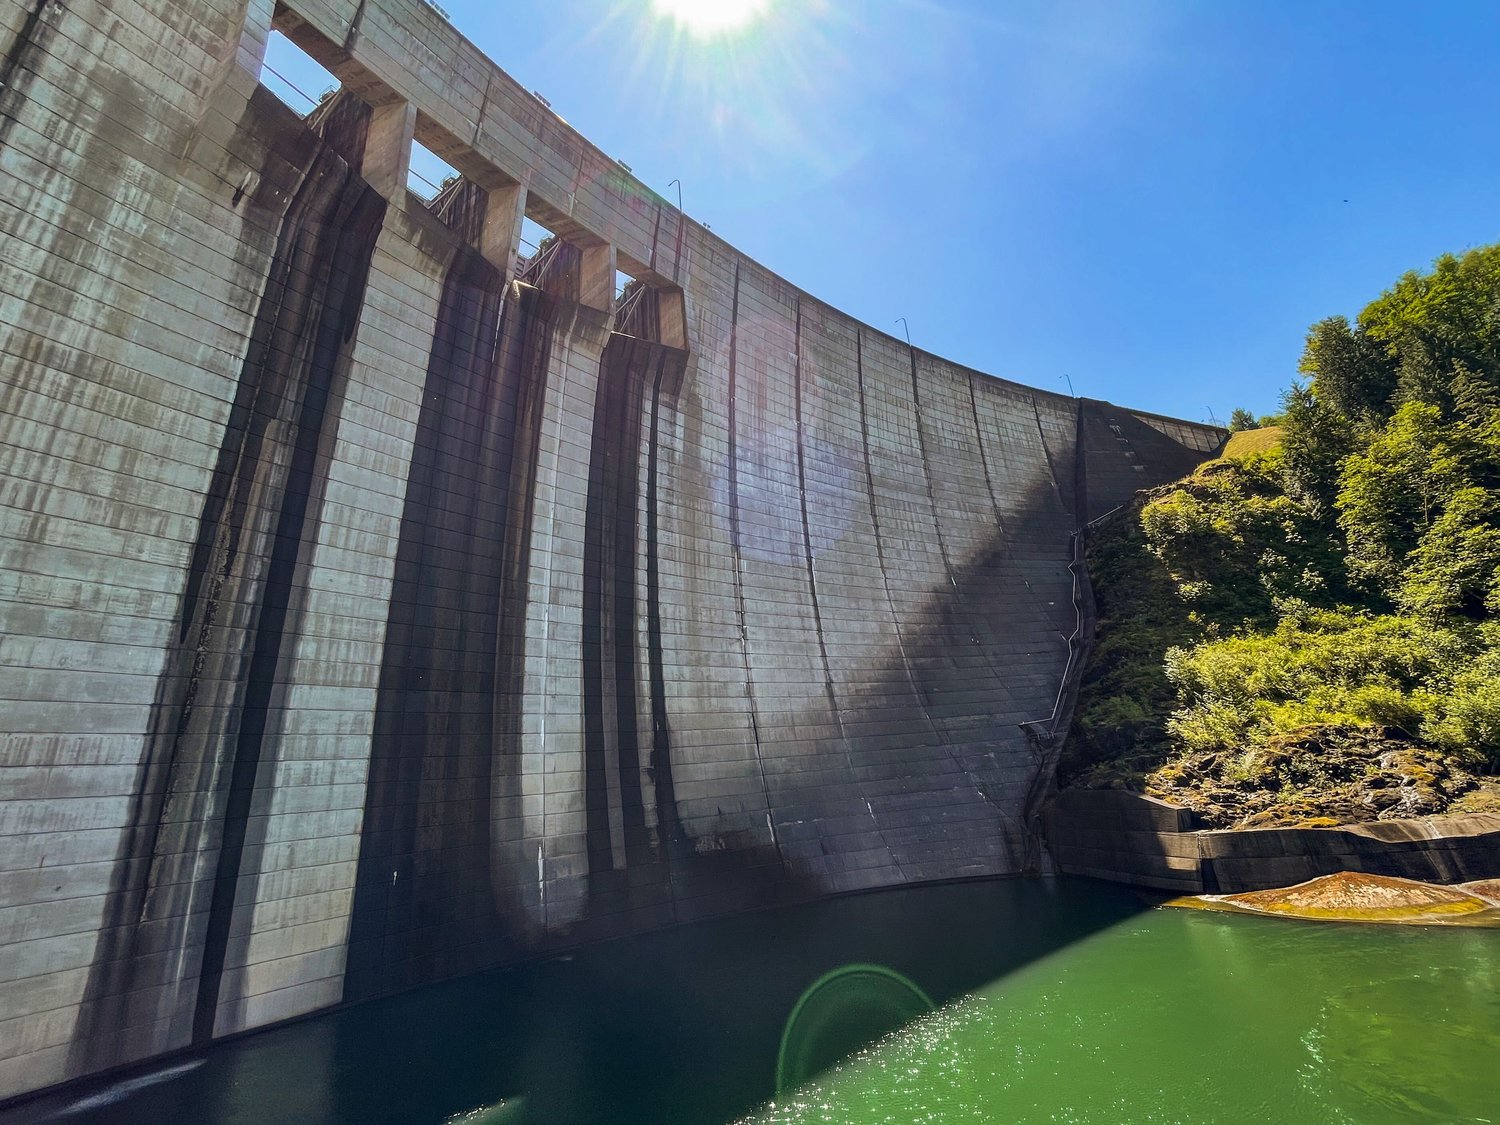 The sun shines down on the Mossyrock Dam casting a shadow on the water.